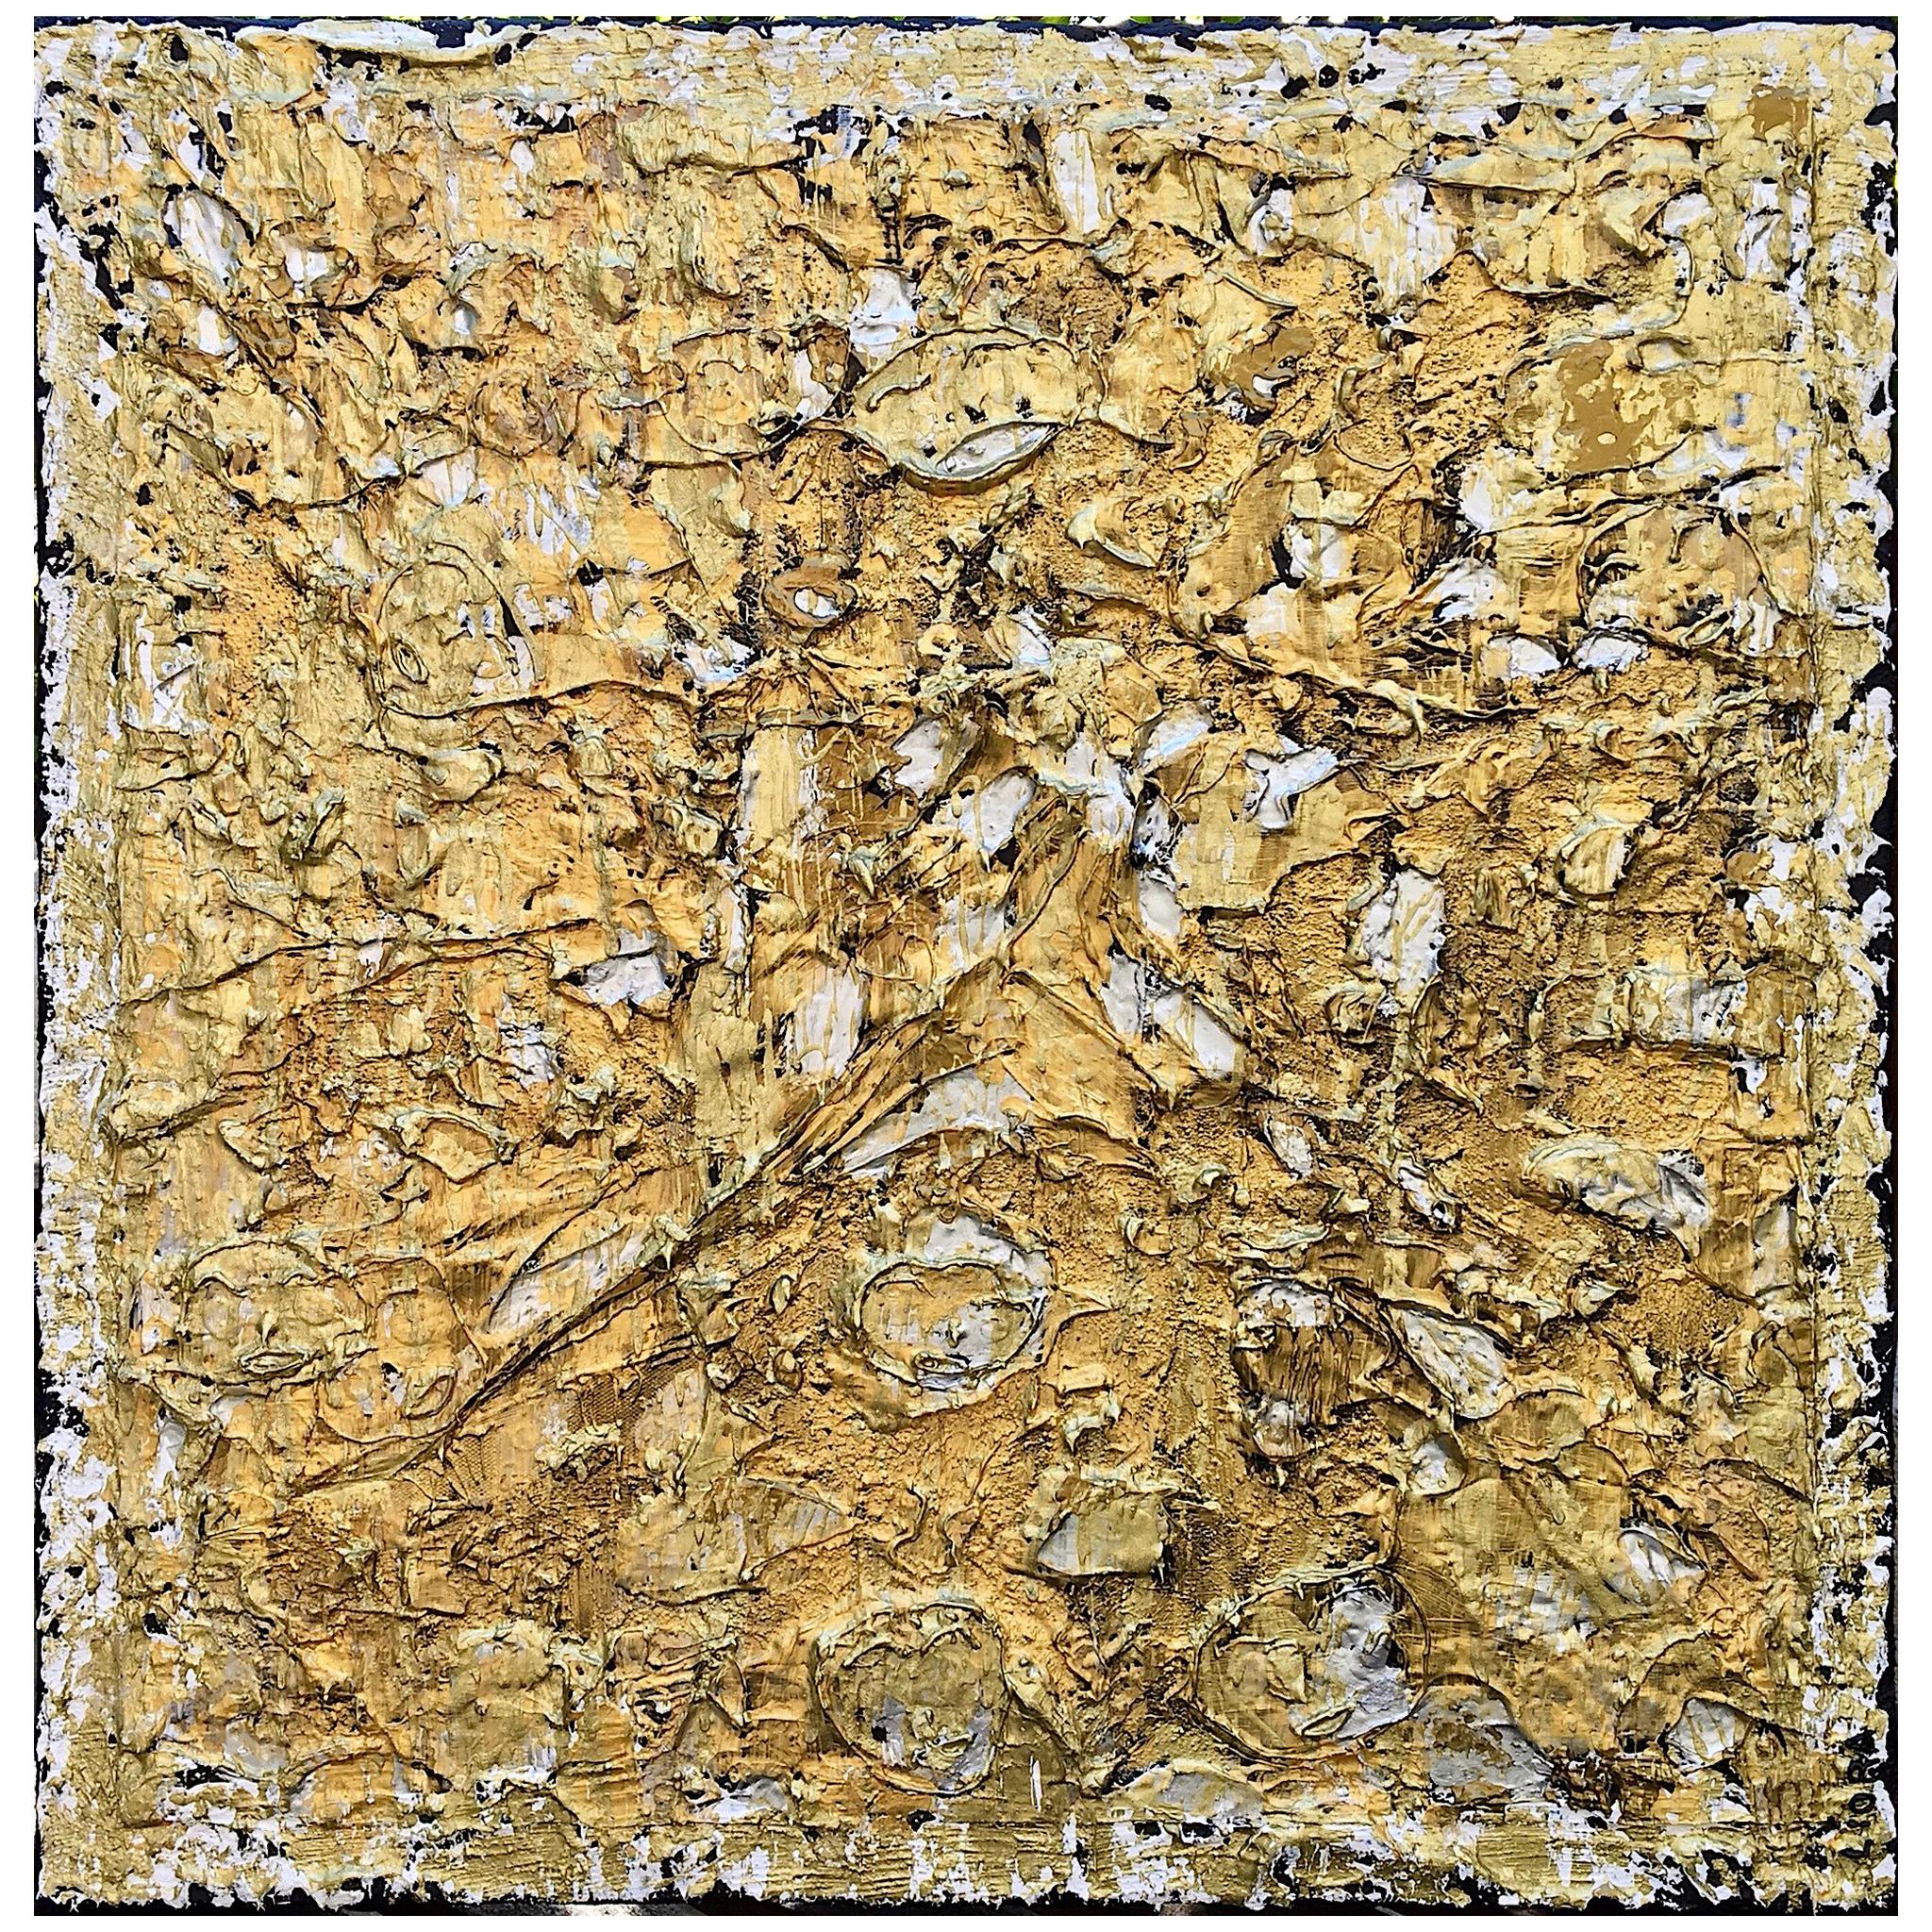 Painting J'Adore 3 by Liora Textured Square Gold Abstract Canvas Contemporary For Sale